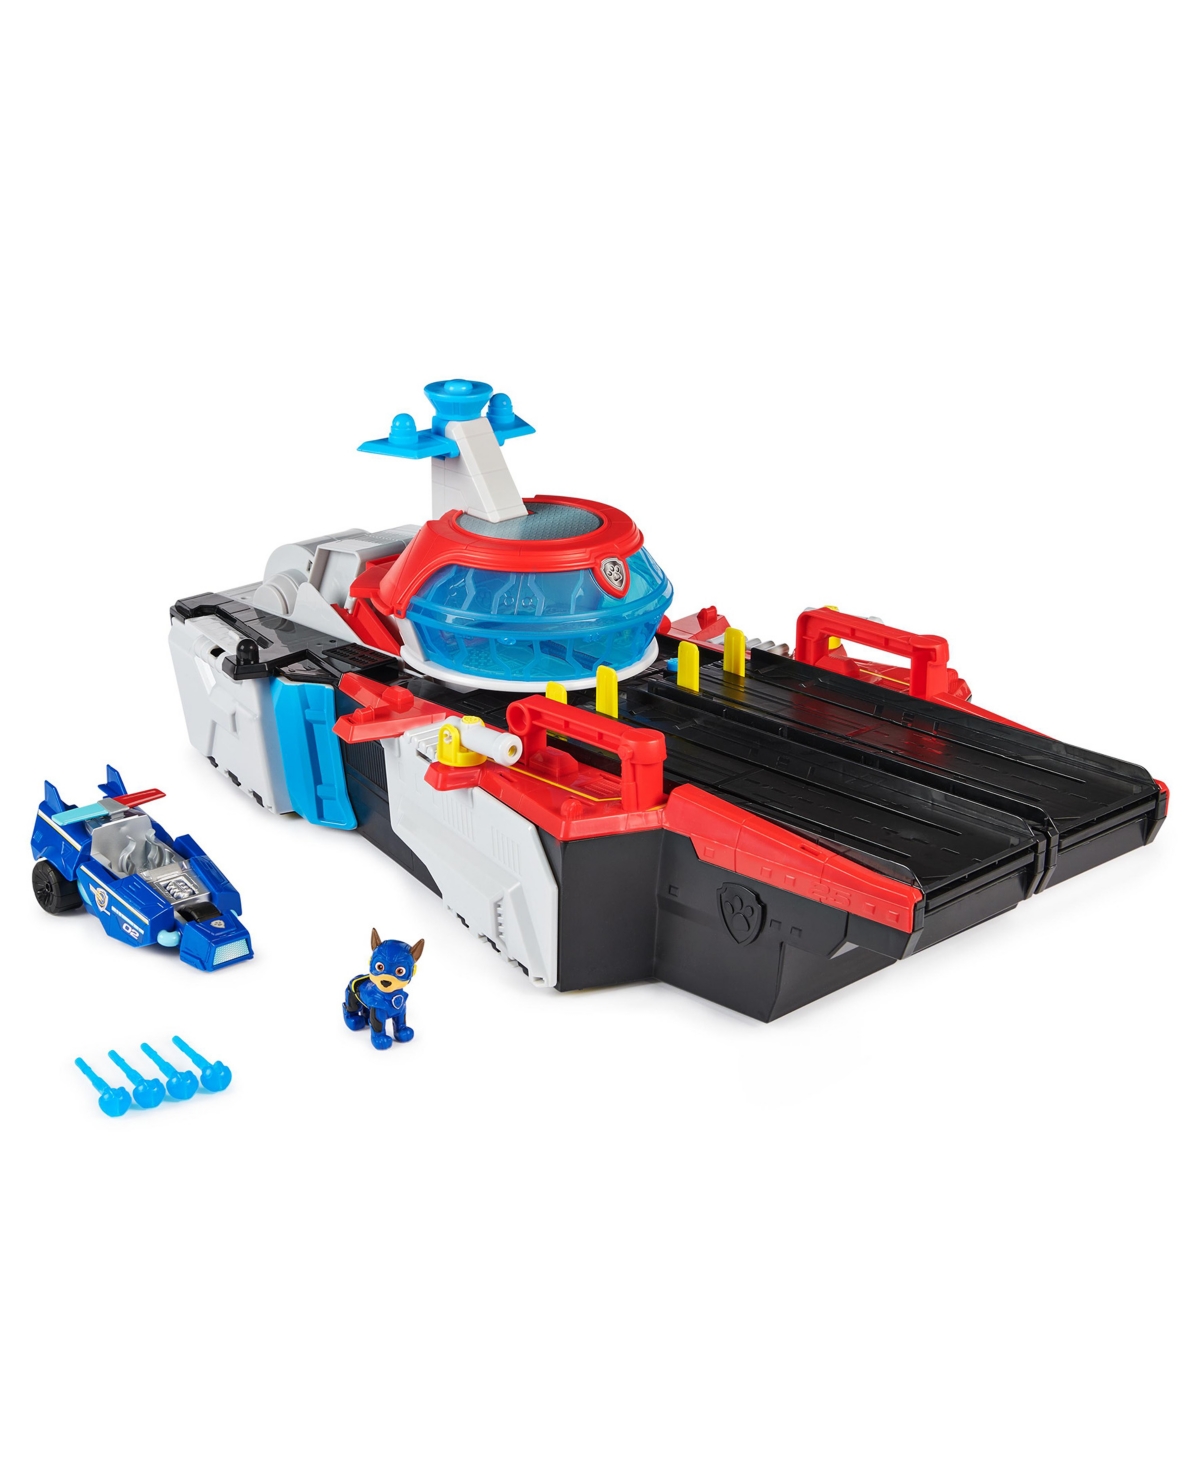 Paw Patrol - The Mighty Movie, Aircraft Carrier Hq, With Chase Action Figure And Mighty Pups Cruiser, Kids Toys In Multicolor